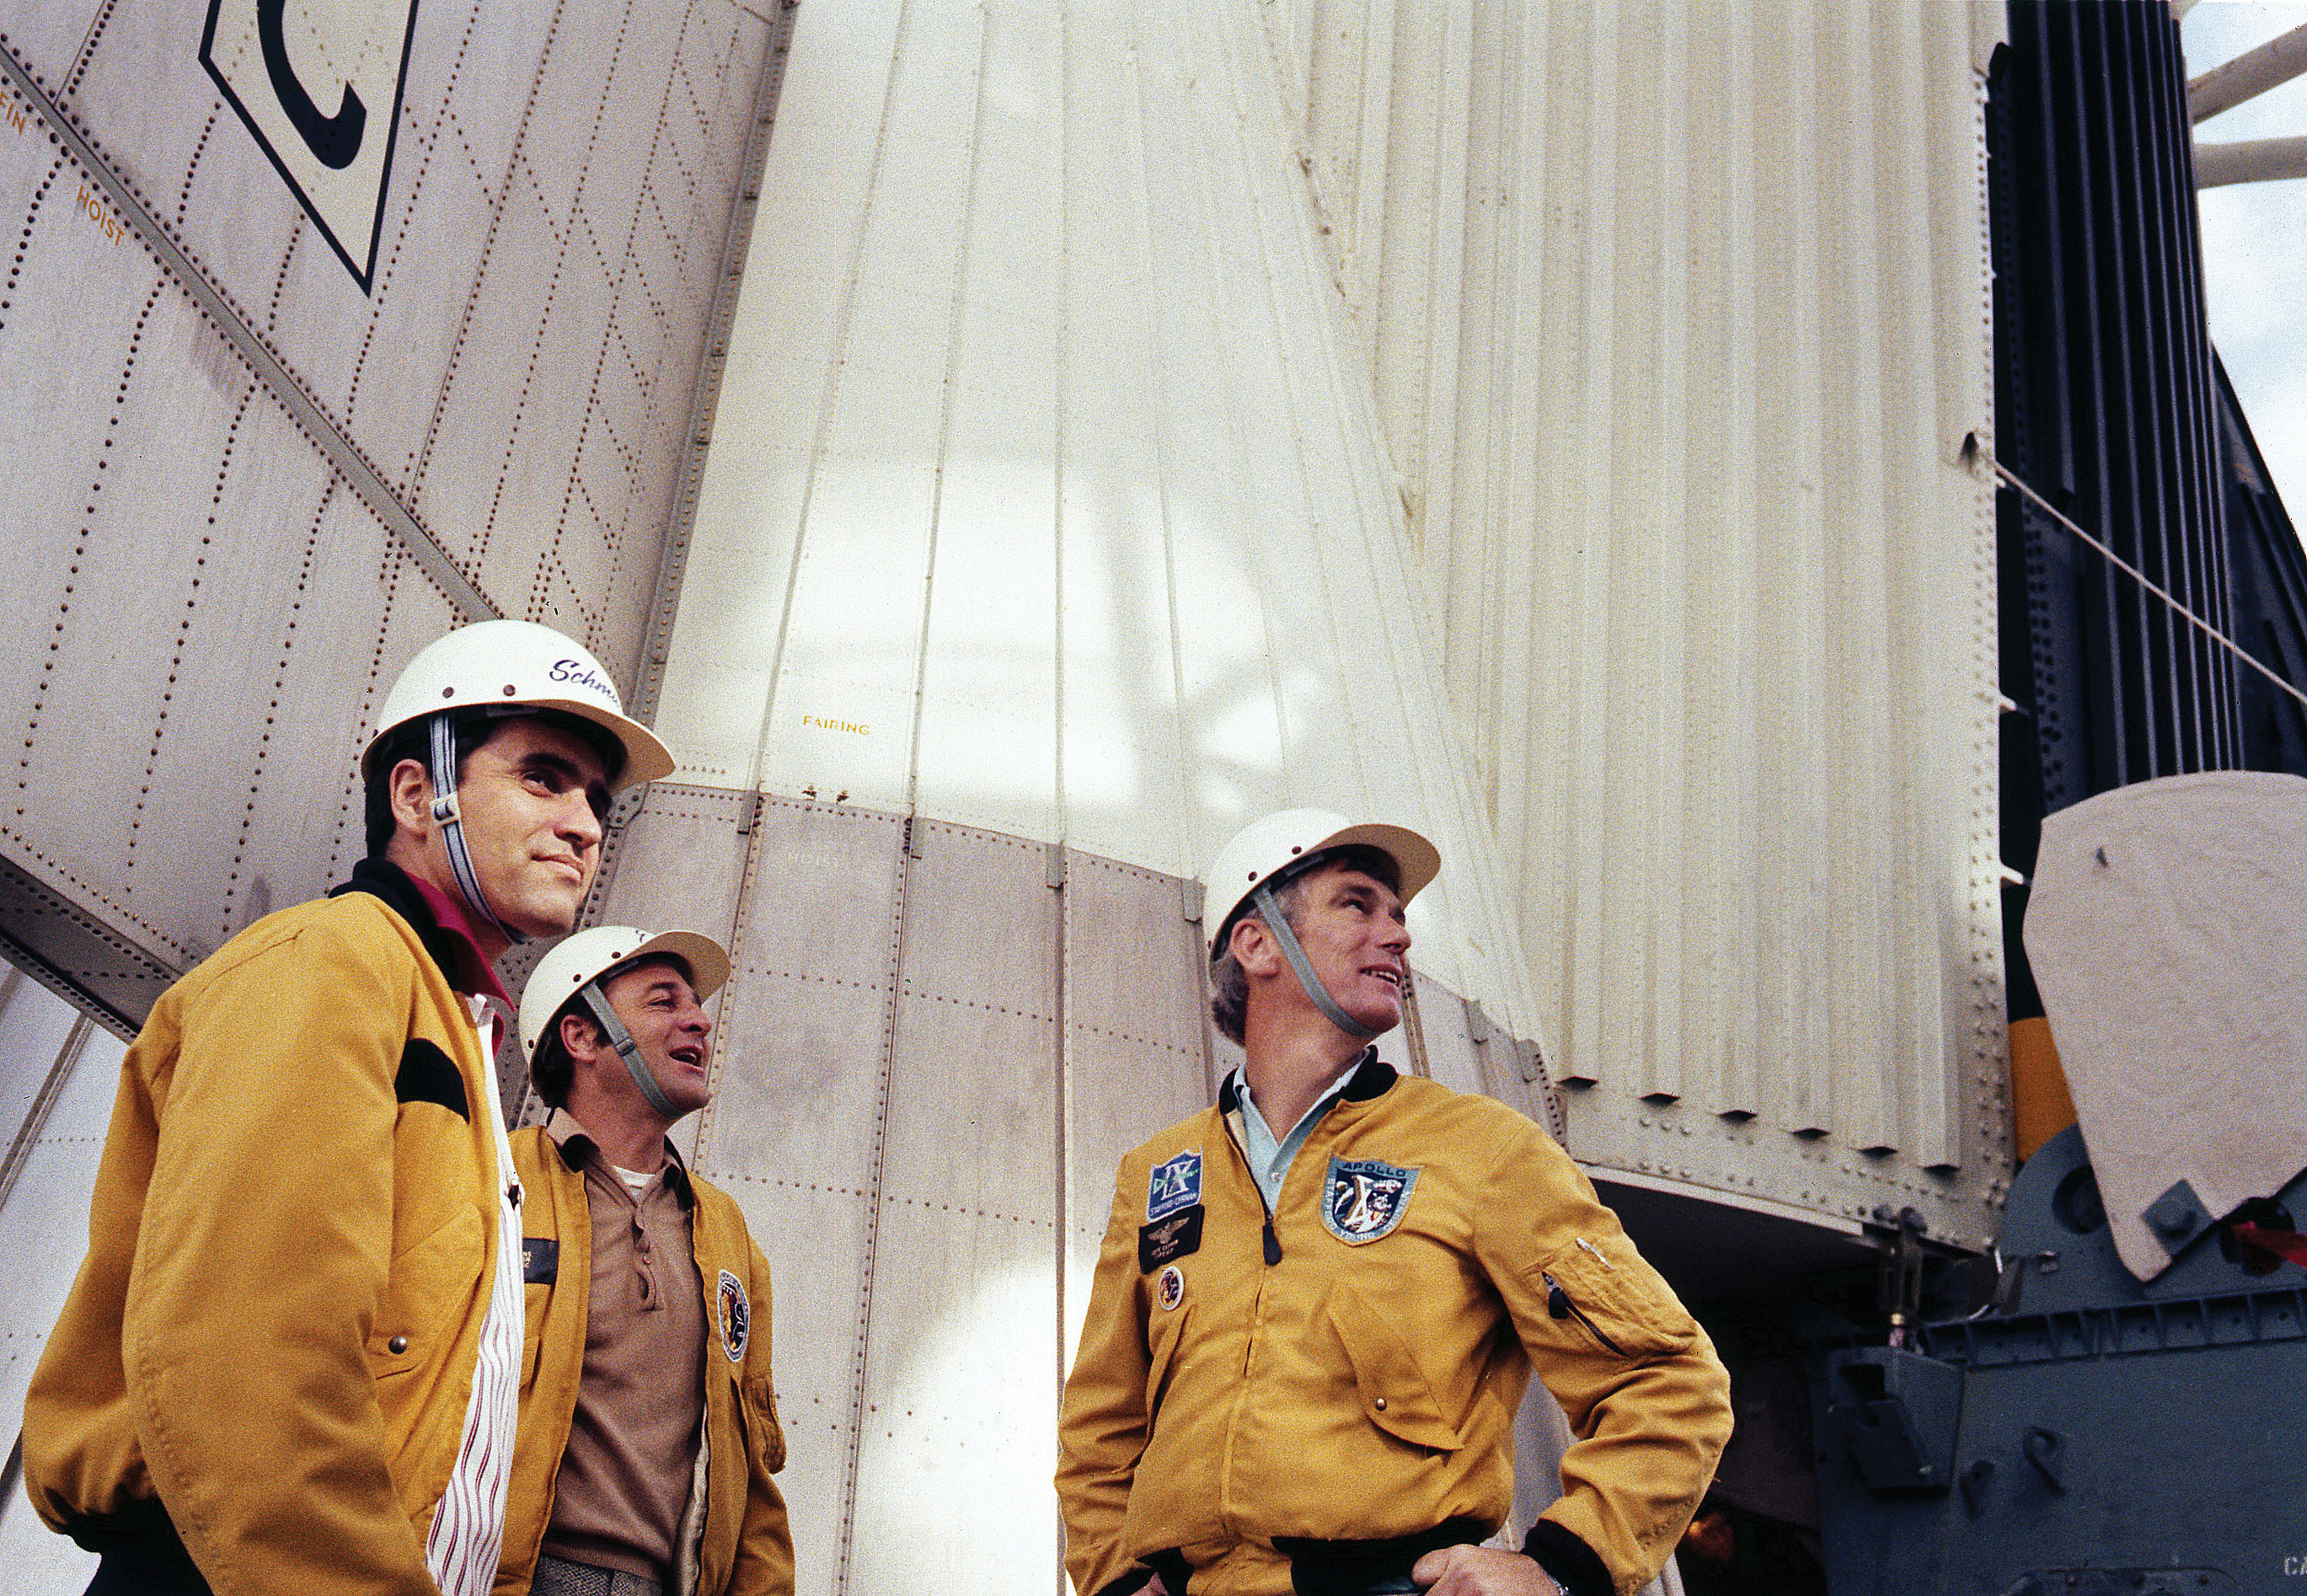 Harrison Schmitt, Ron Evans, and Gene Cernan stand at the base of their Saturn V rocket during a visit to the pad just days before the launch of Apollo 17. Credit: NASA via J.L. Pickering/Retro Space Images